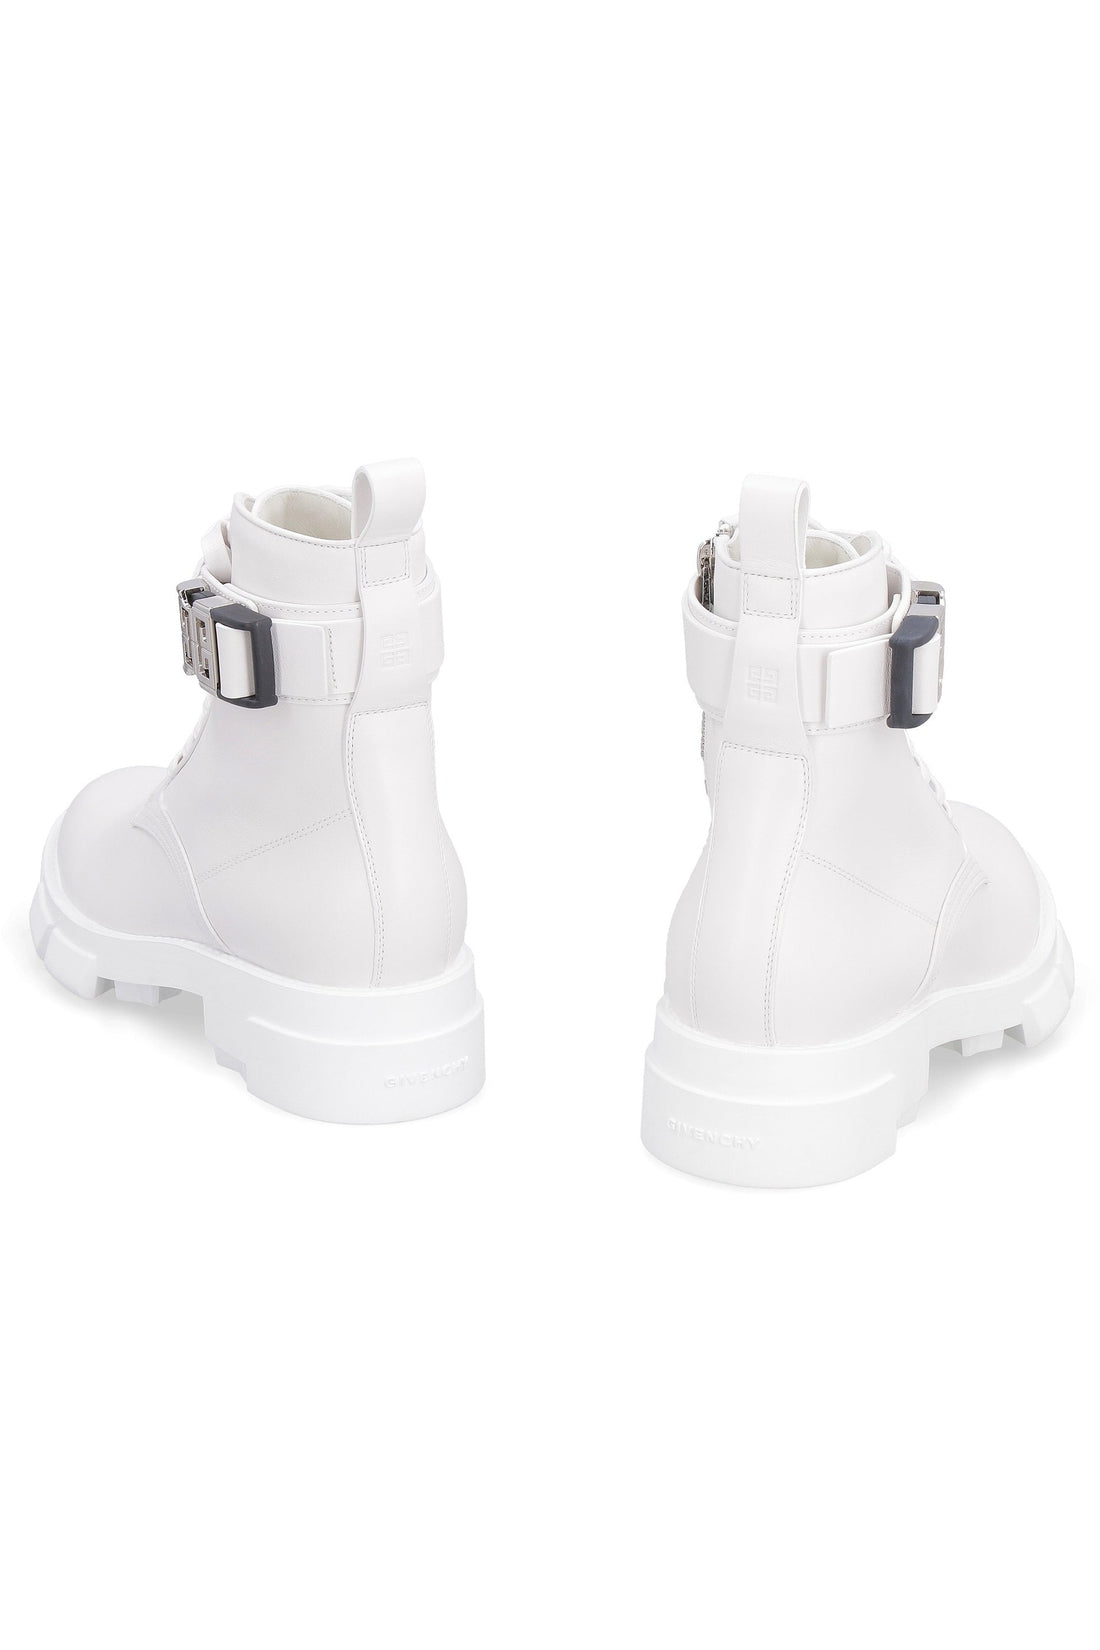 Givenchy-OUTLET-SALE-Terra leather ankle boots-ARCHIVIST